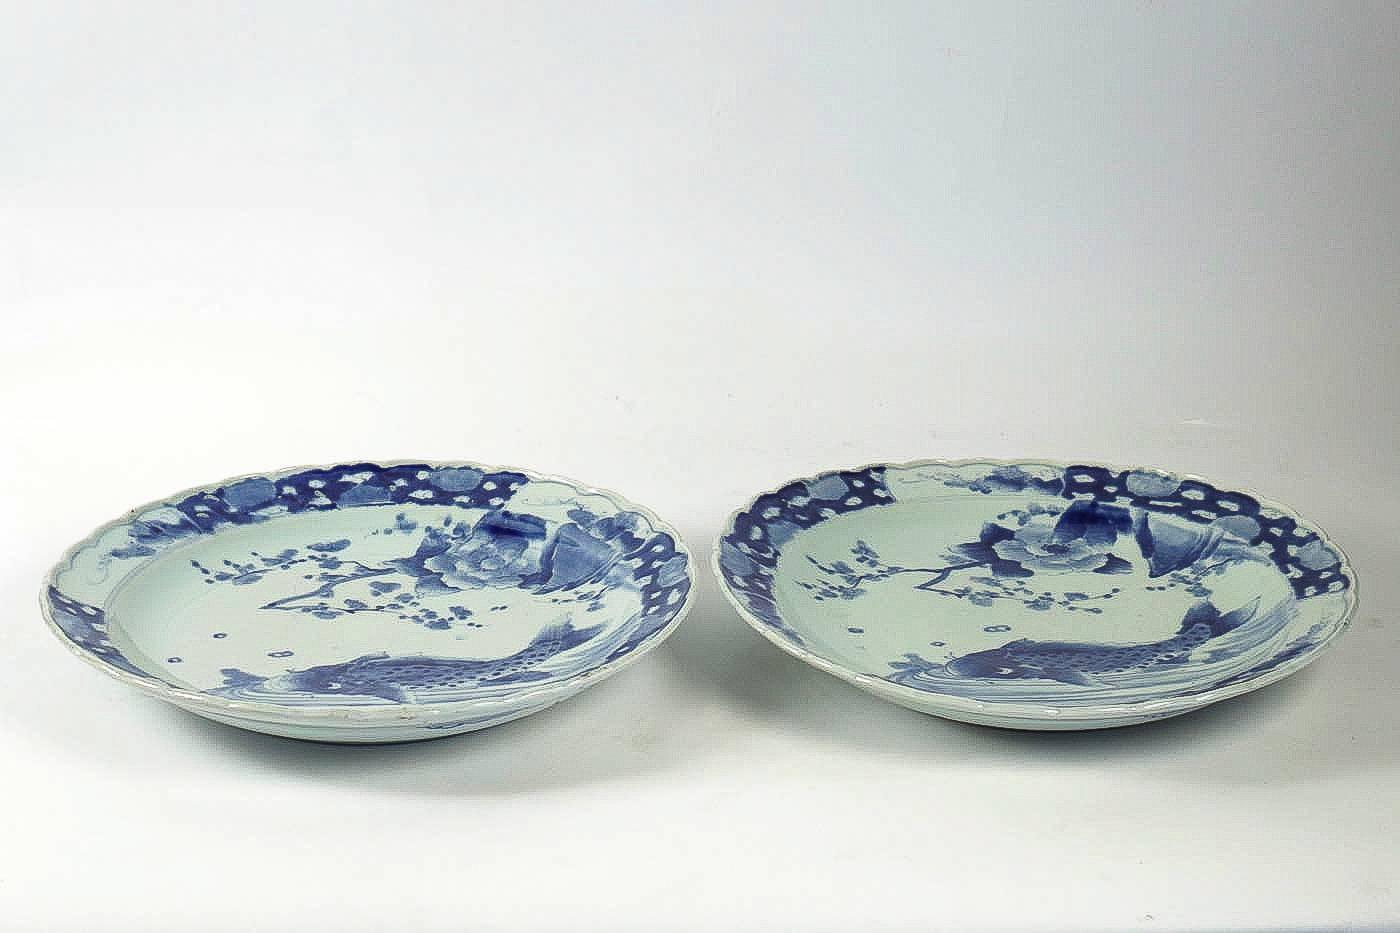 19th Century Japan, a Large Pair of Porcelain Dishes with Blue Koï Carps For Sale 7